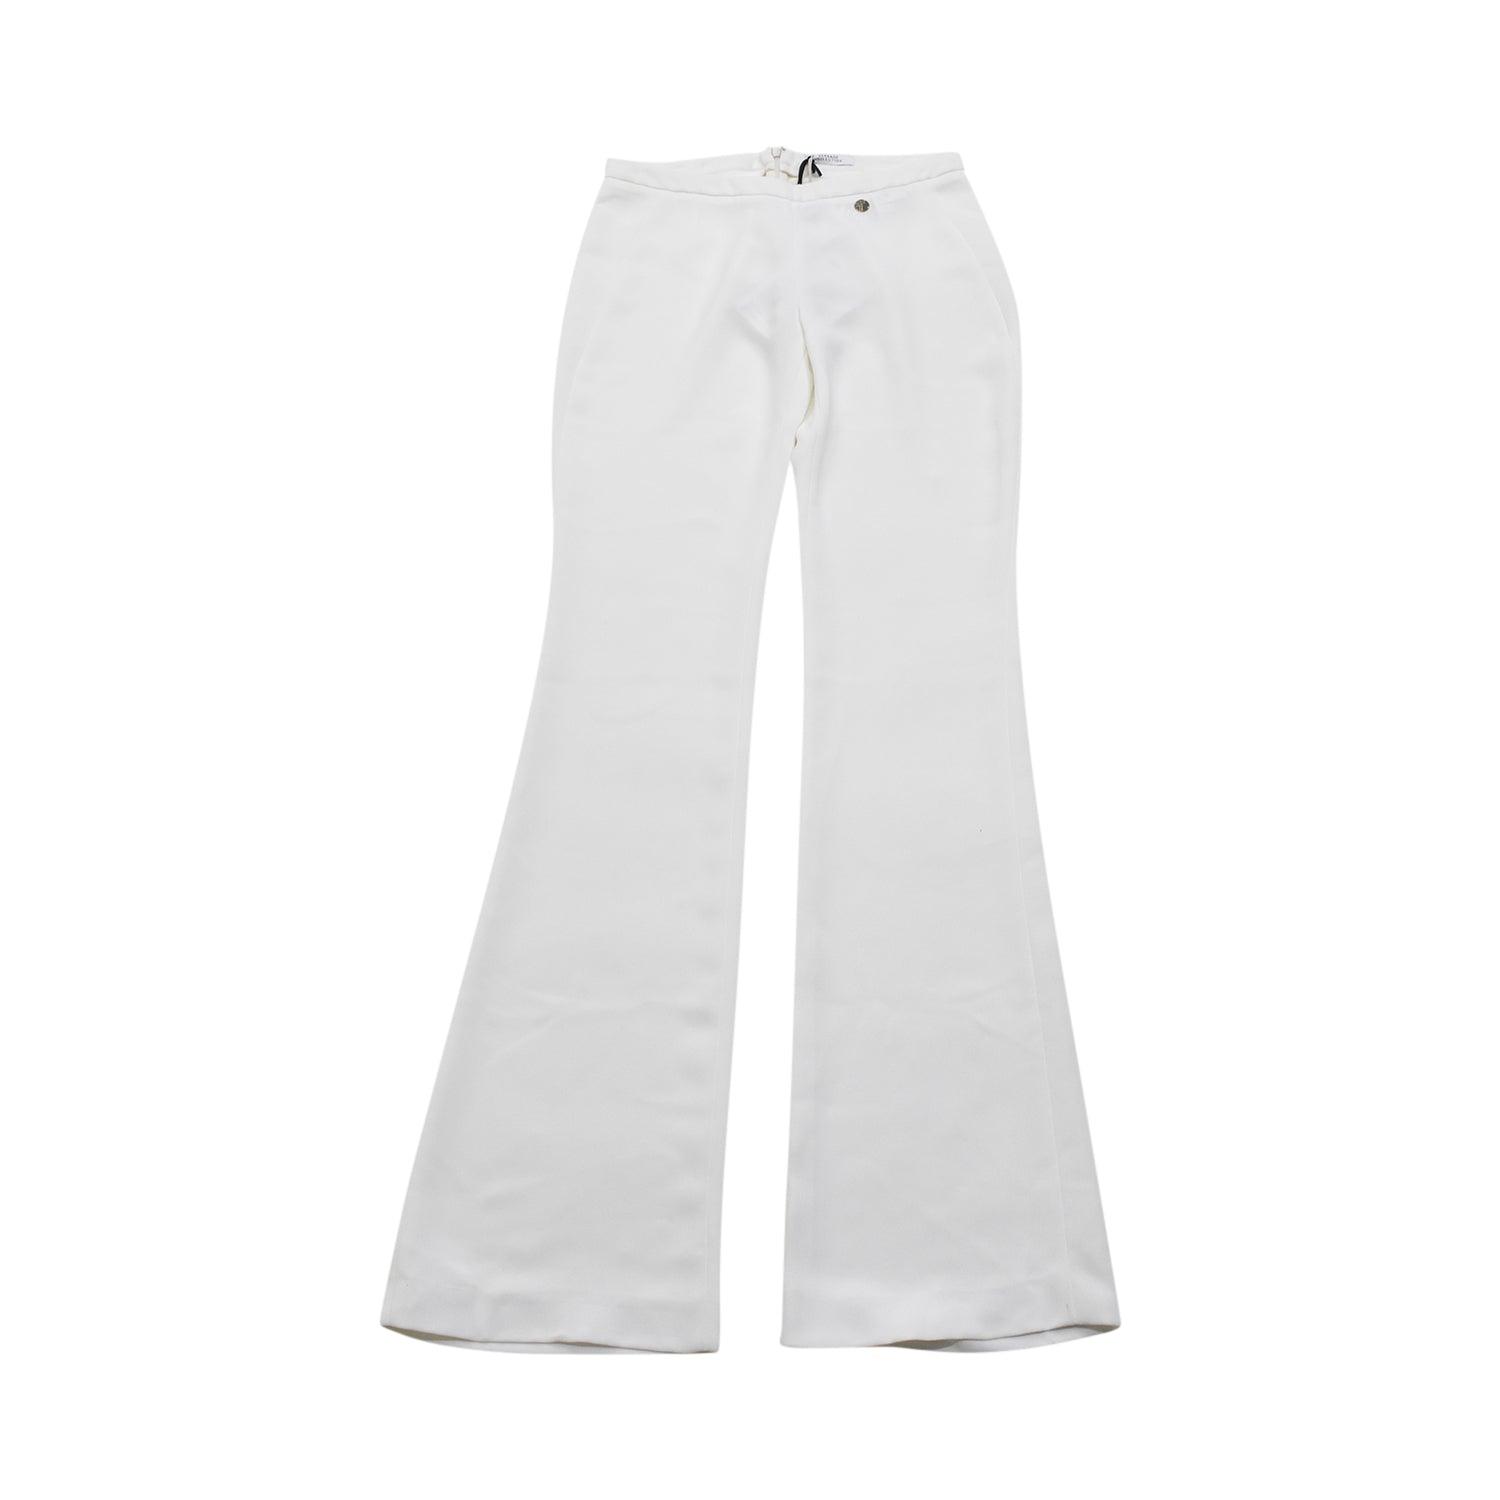 Versace Flare Pants - Women's 40 - Fashionably Yours